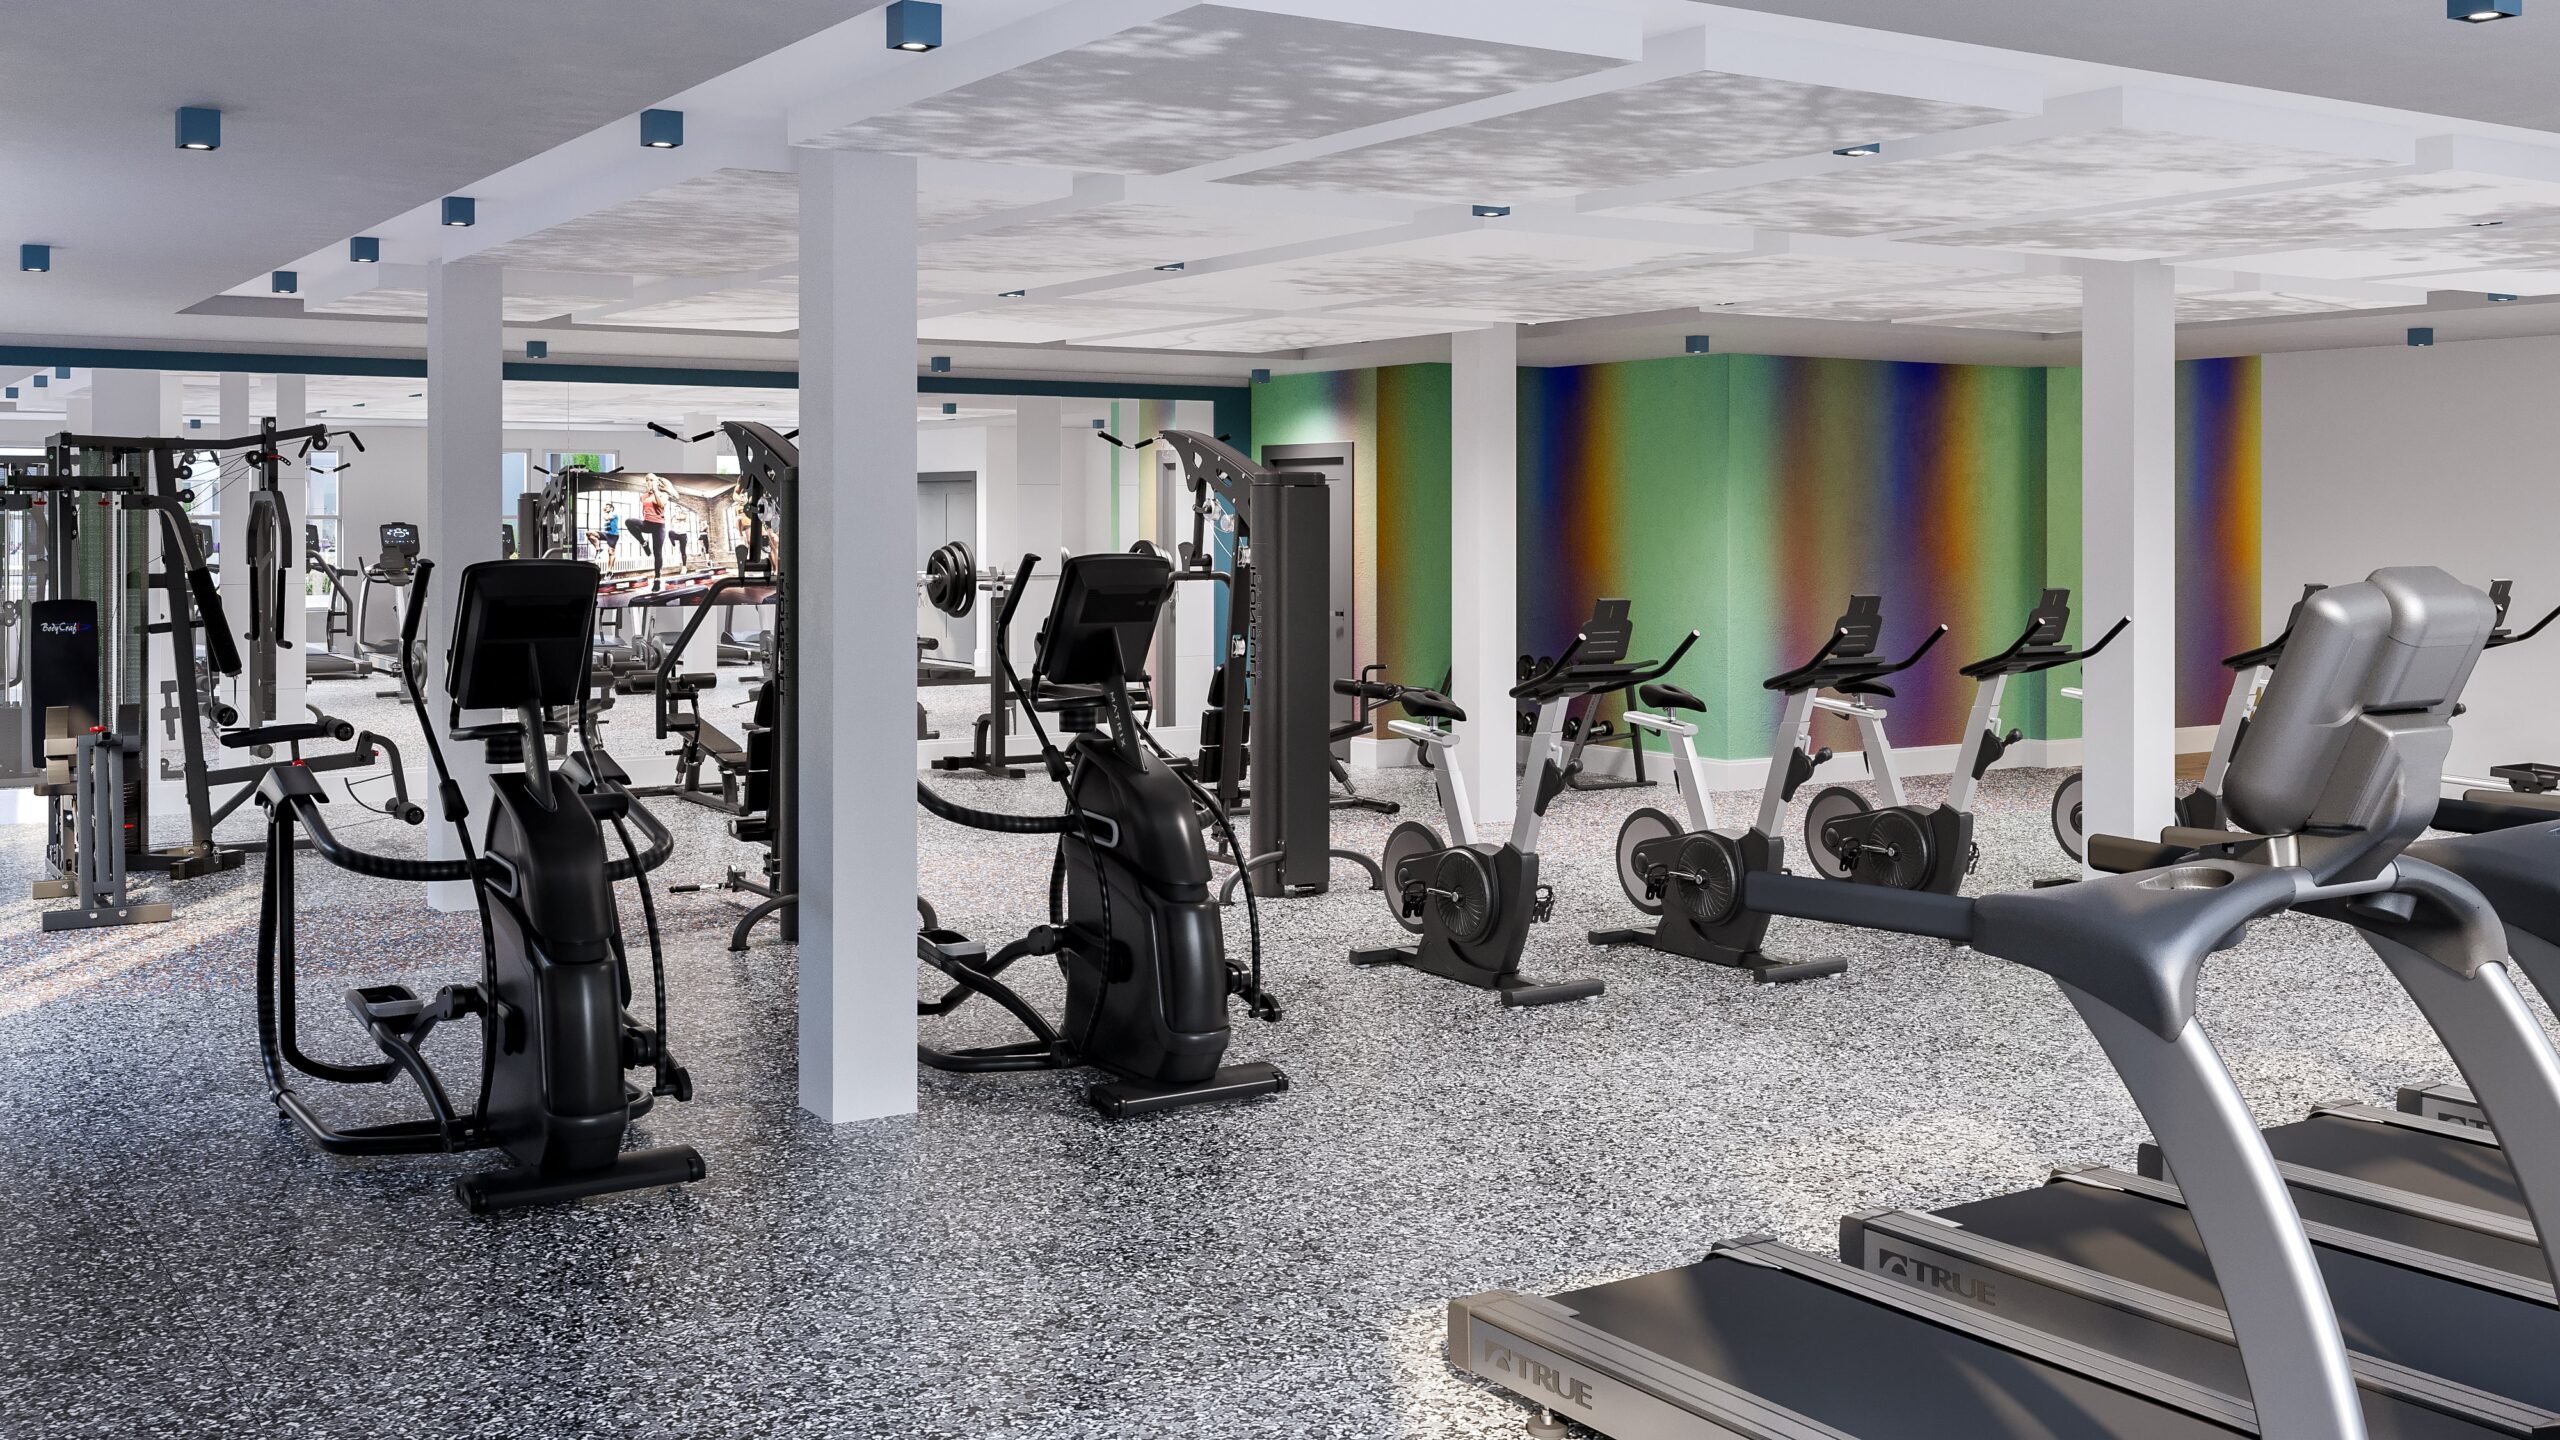 A fully equipped fitness center with several machines and weights.